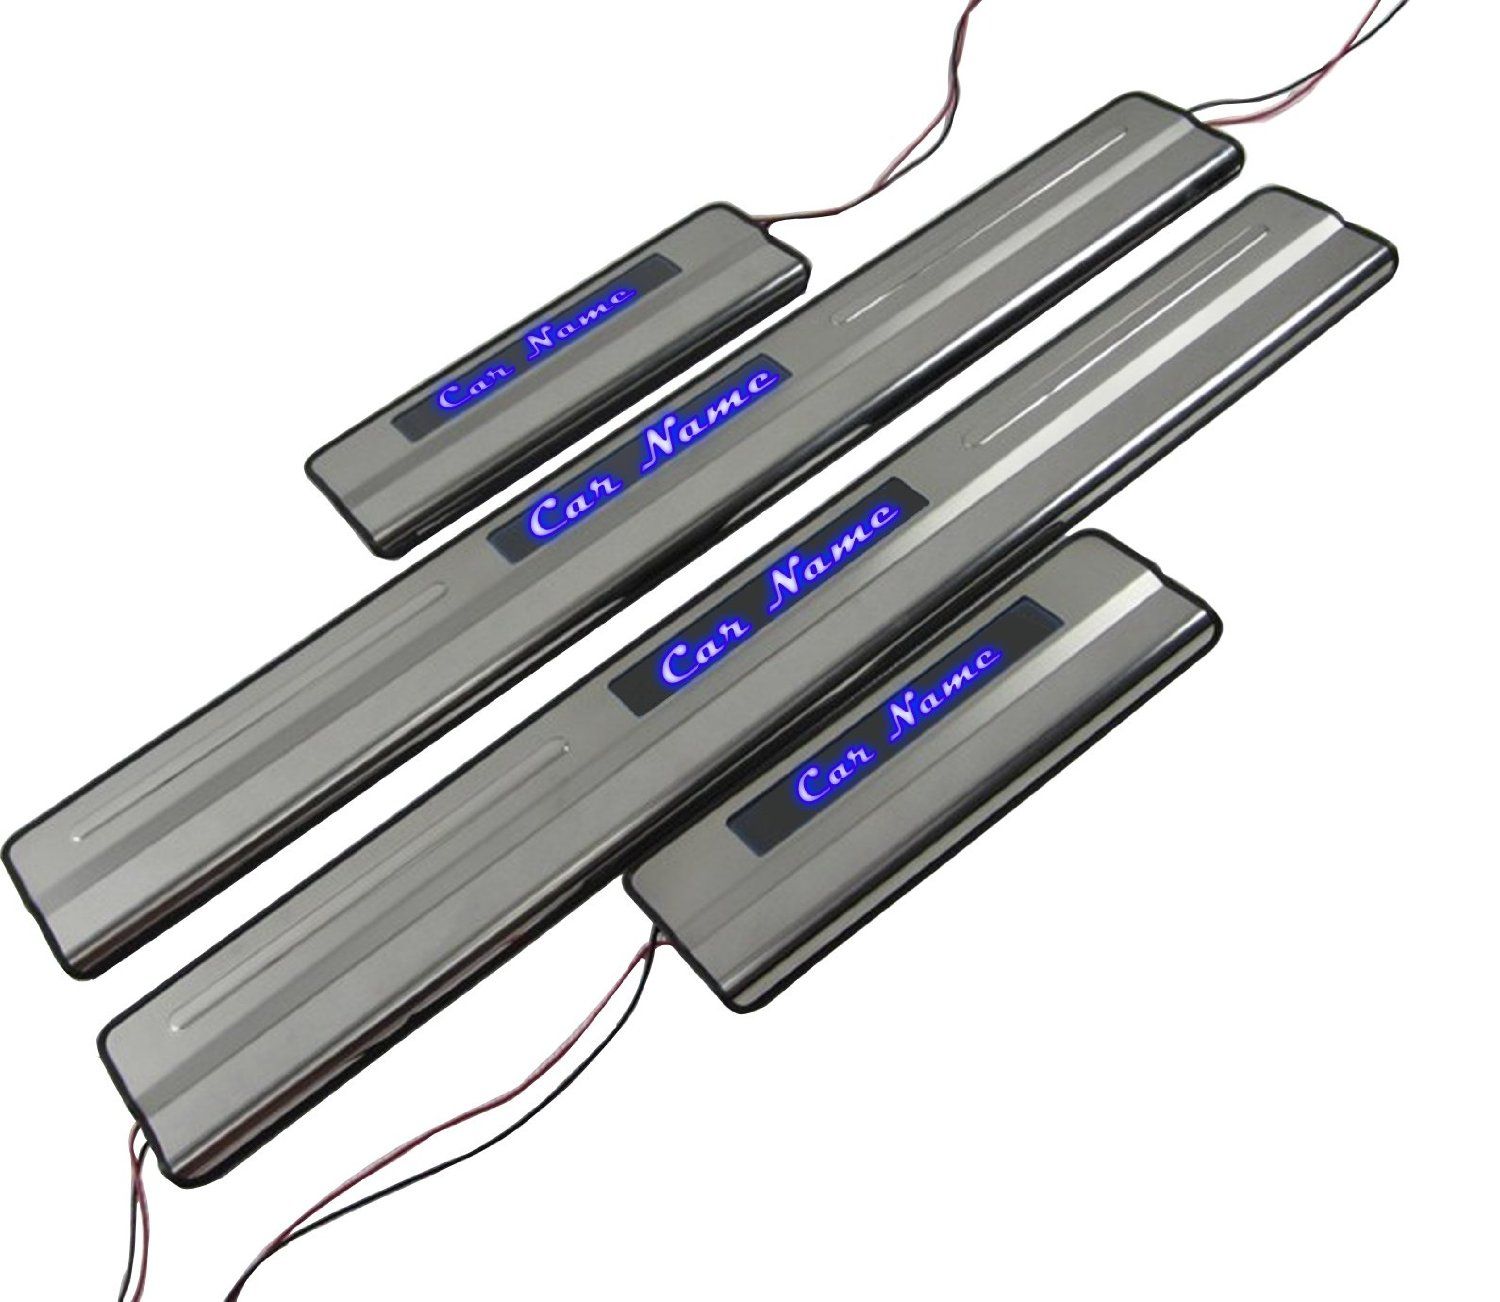 LED Doorstep Garnish Stainless Steel Scuff/FootStep Sill Plate For MARUTI RITZ(Set of 4pcs)